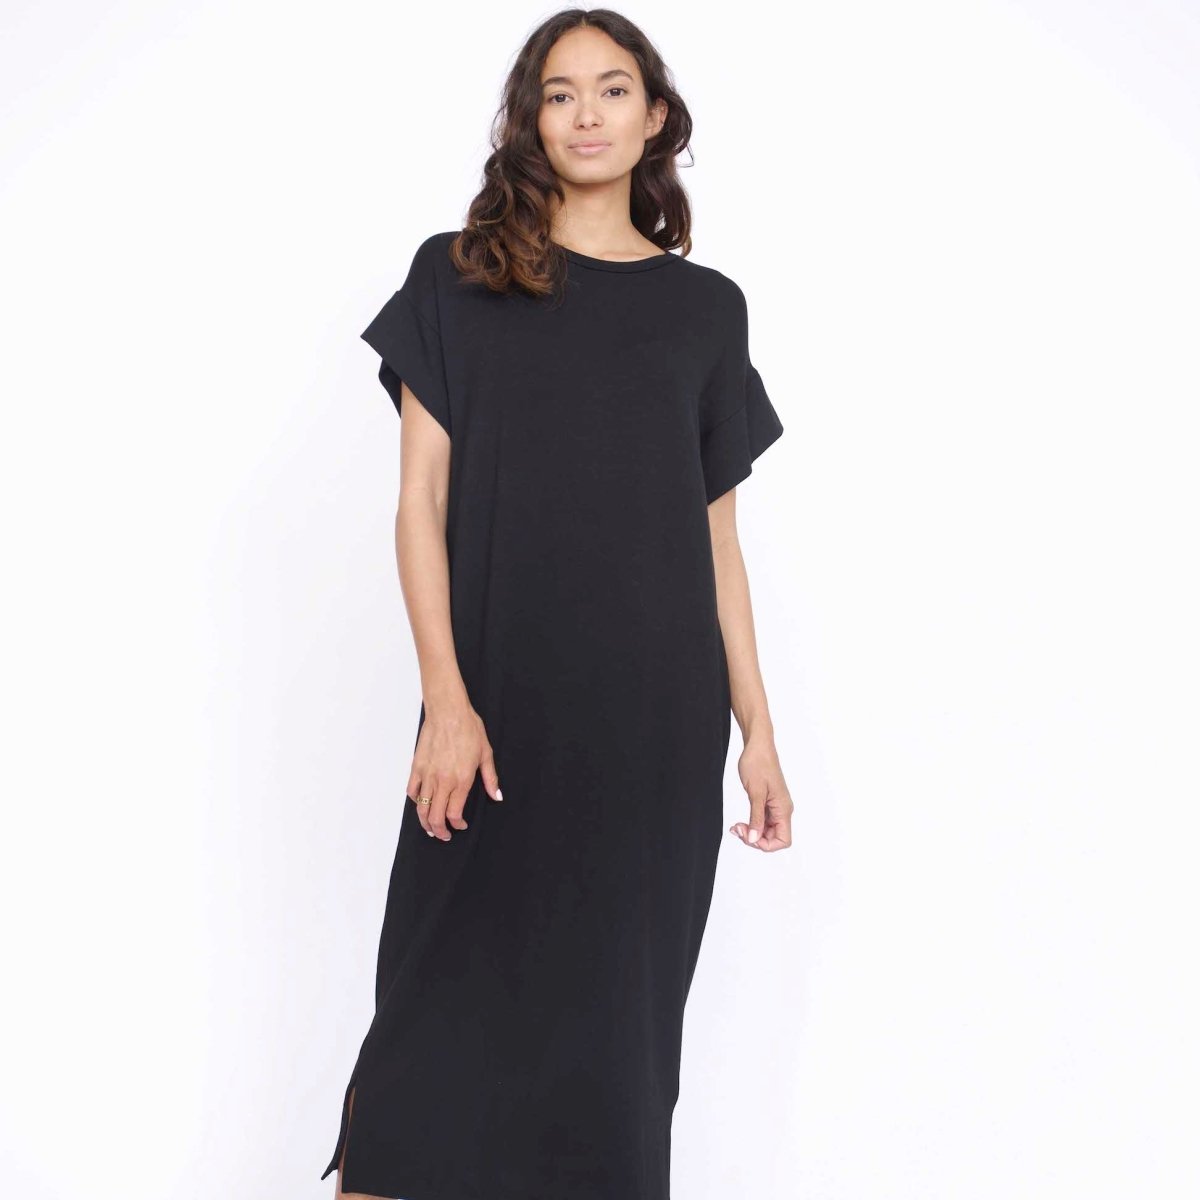 Short sleeve midi dress with side slits in Black. Fabric and dress made in Los Angeles, CA by Corinne Collective.